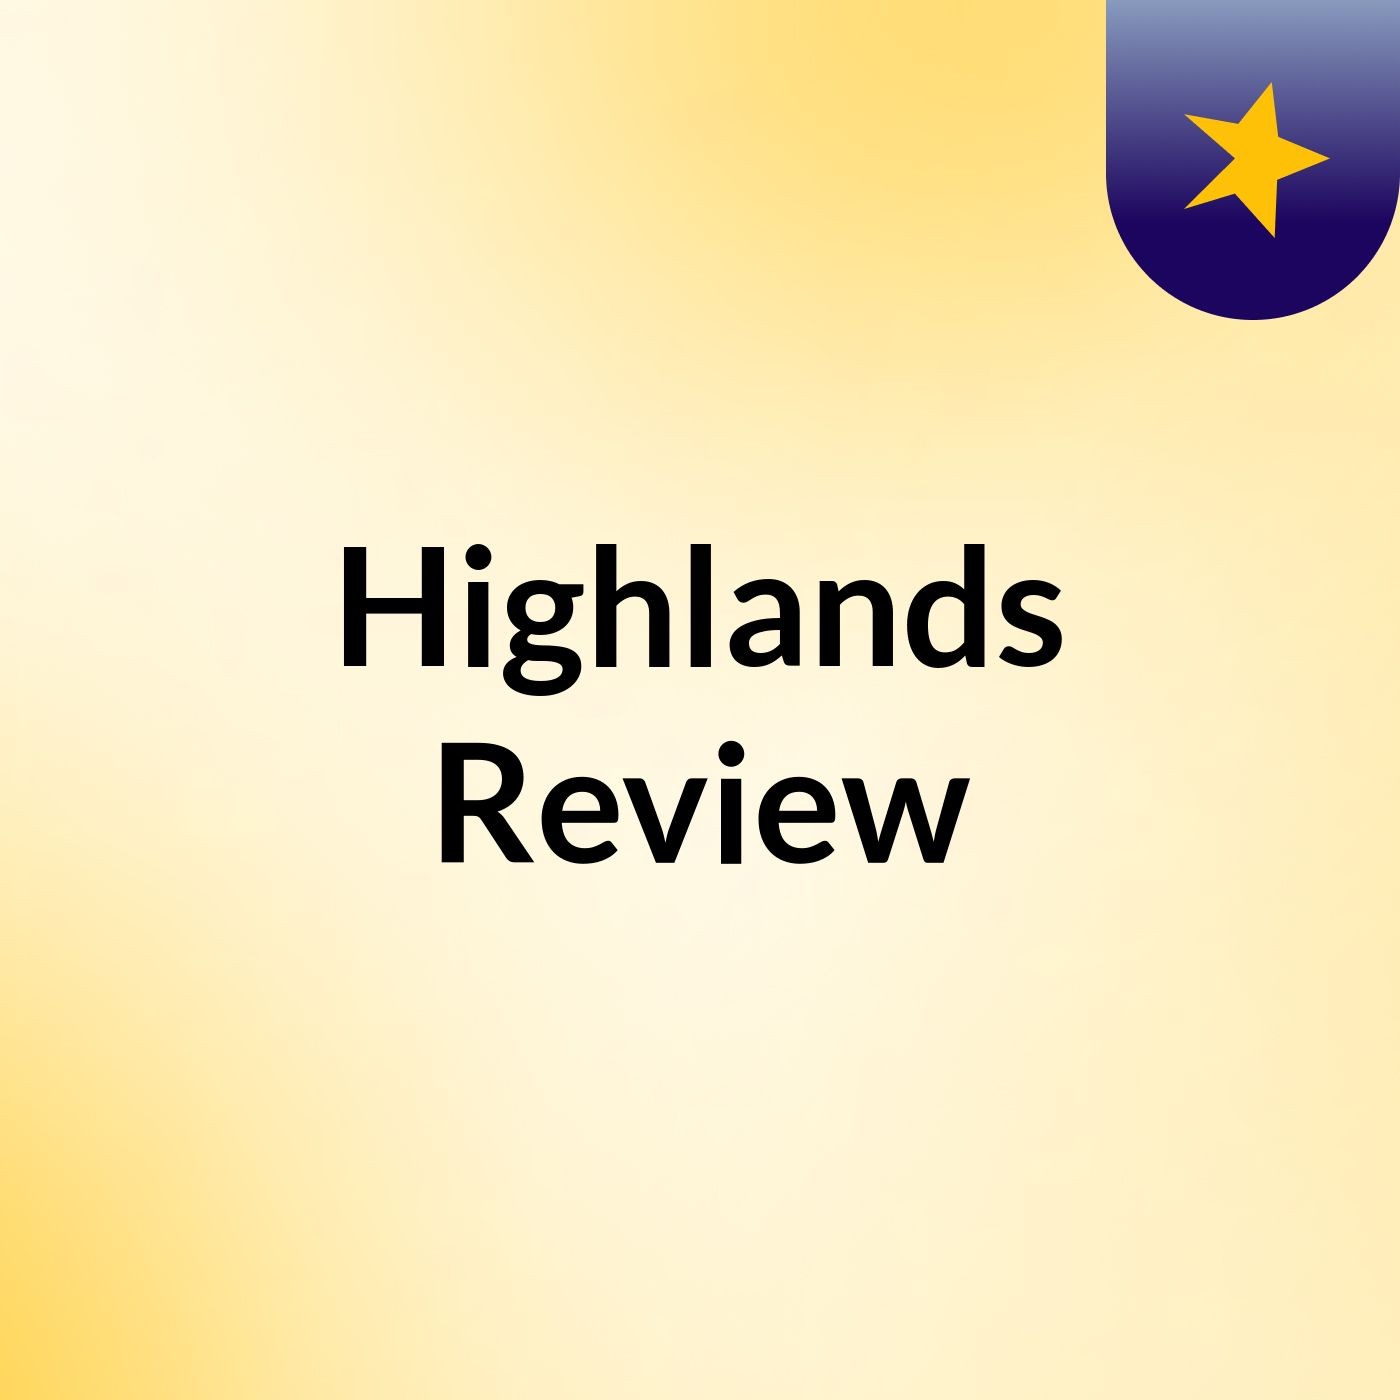 Highlands Review